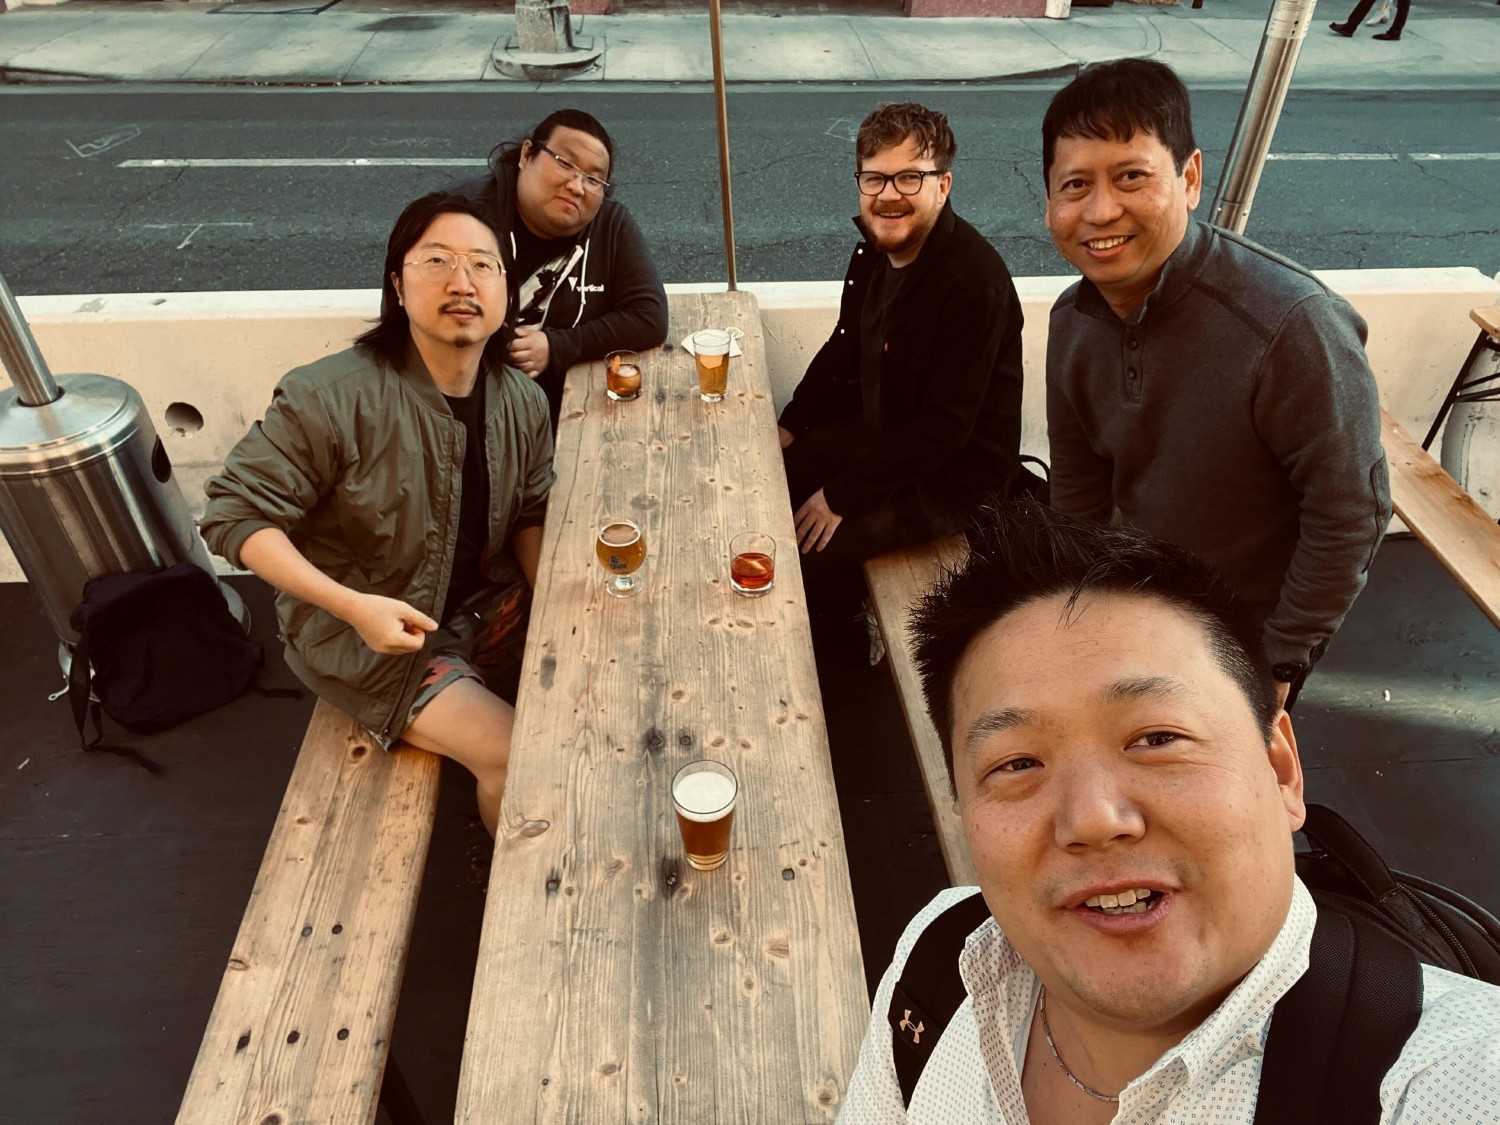 Five of our colleagues grabbing drinks after week long strategy session. 